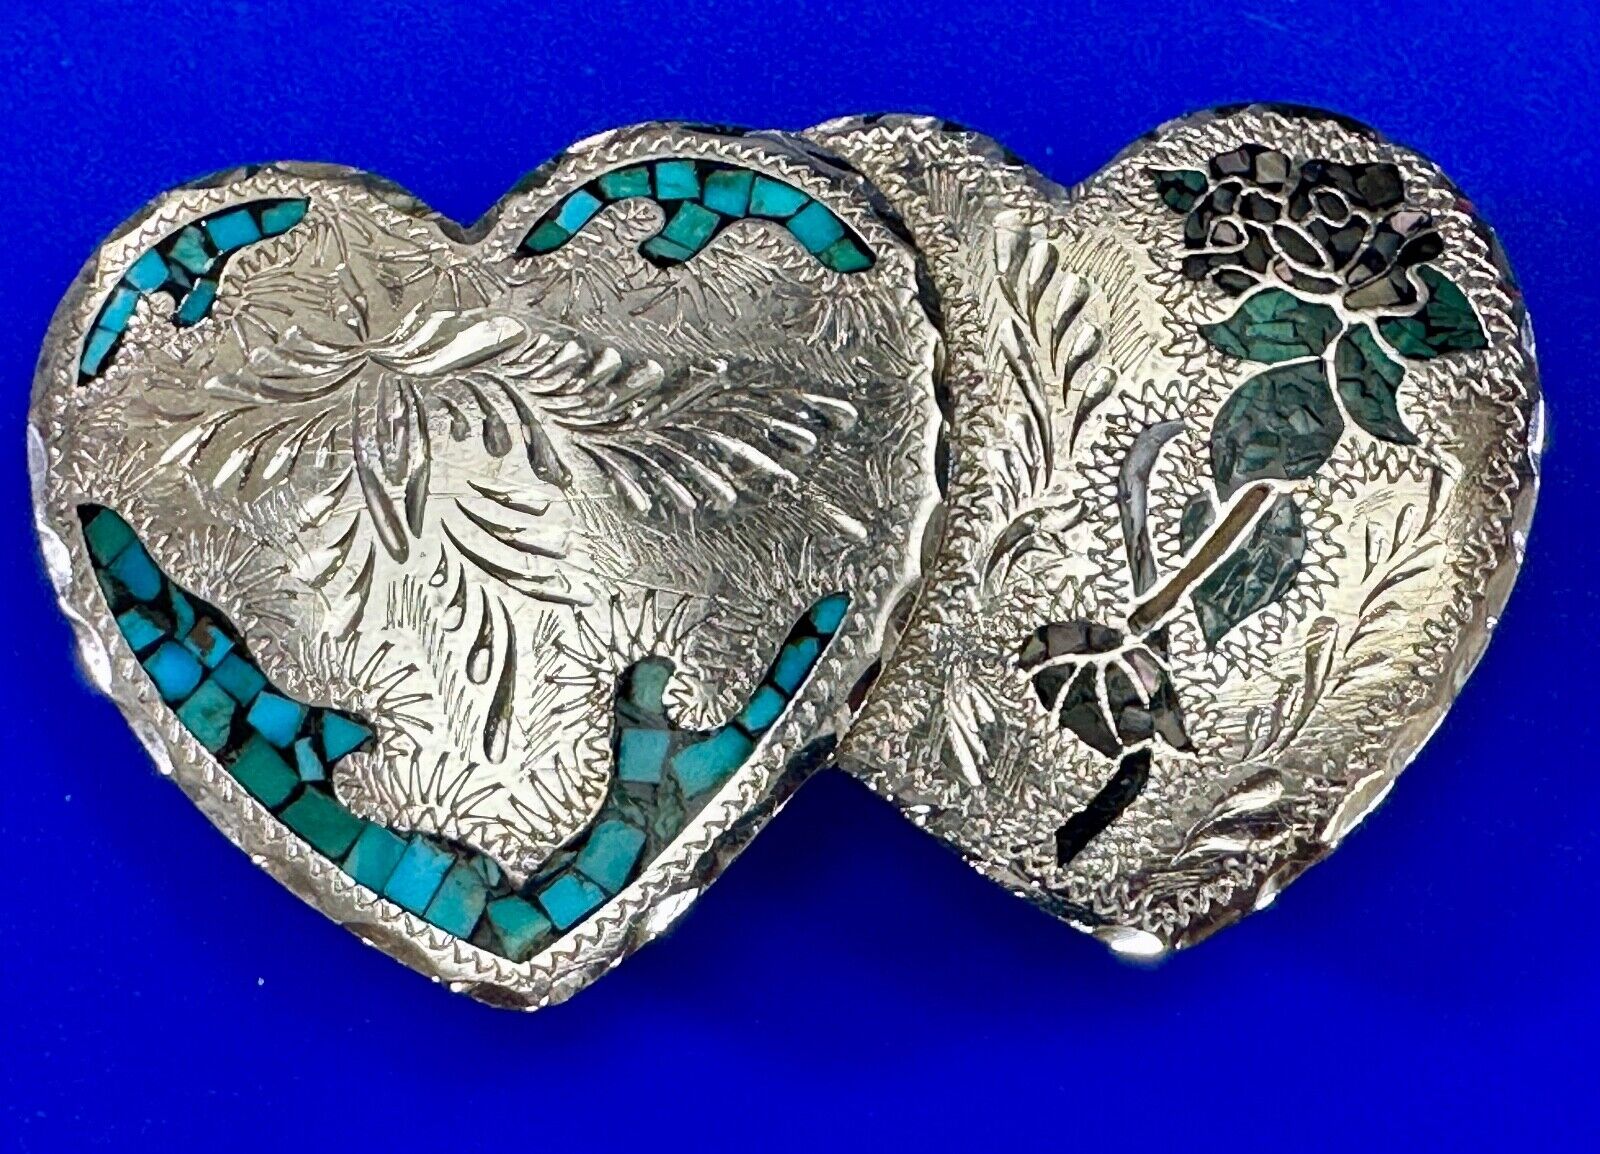 Dual HEARTS Flowers Western ART ornate Turquoise Coral Shell inlaid belt buckle